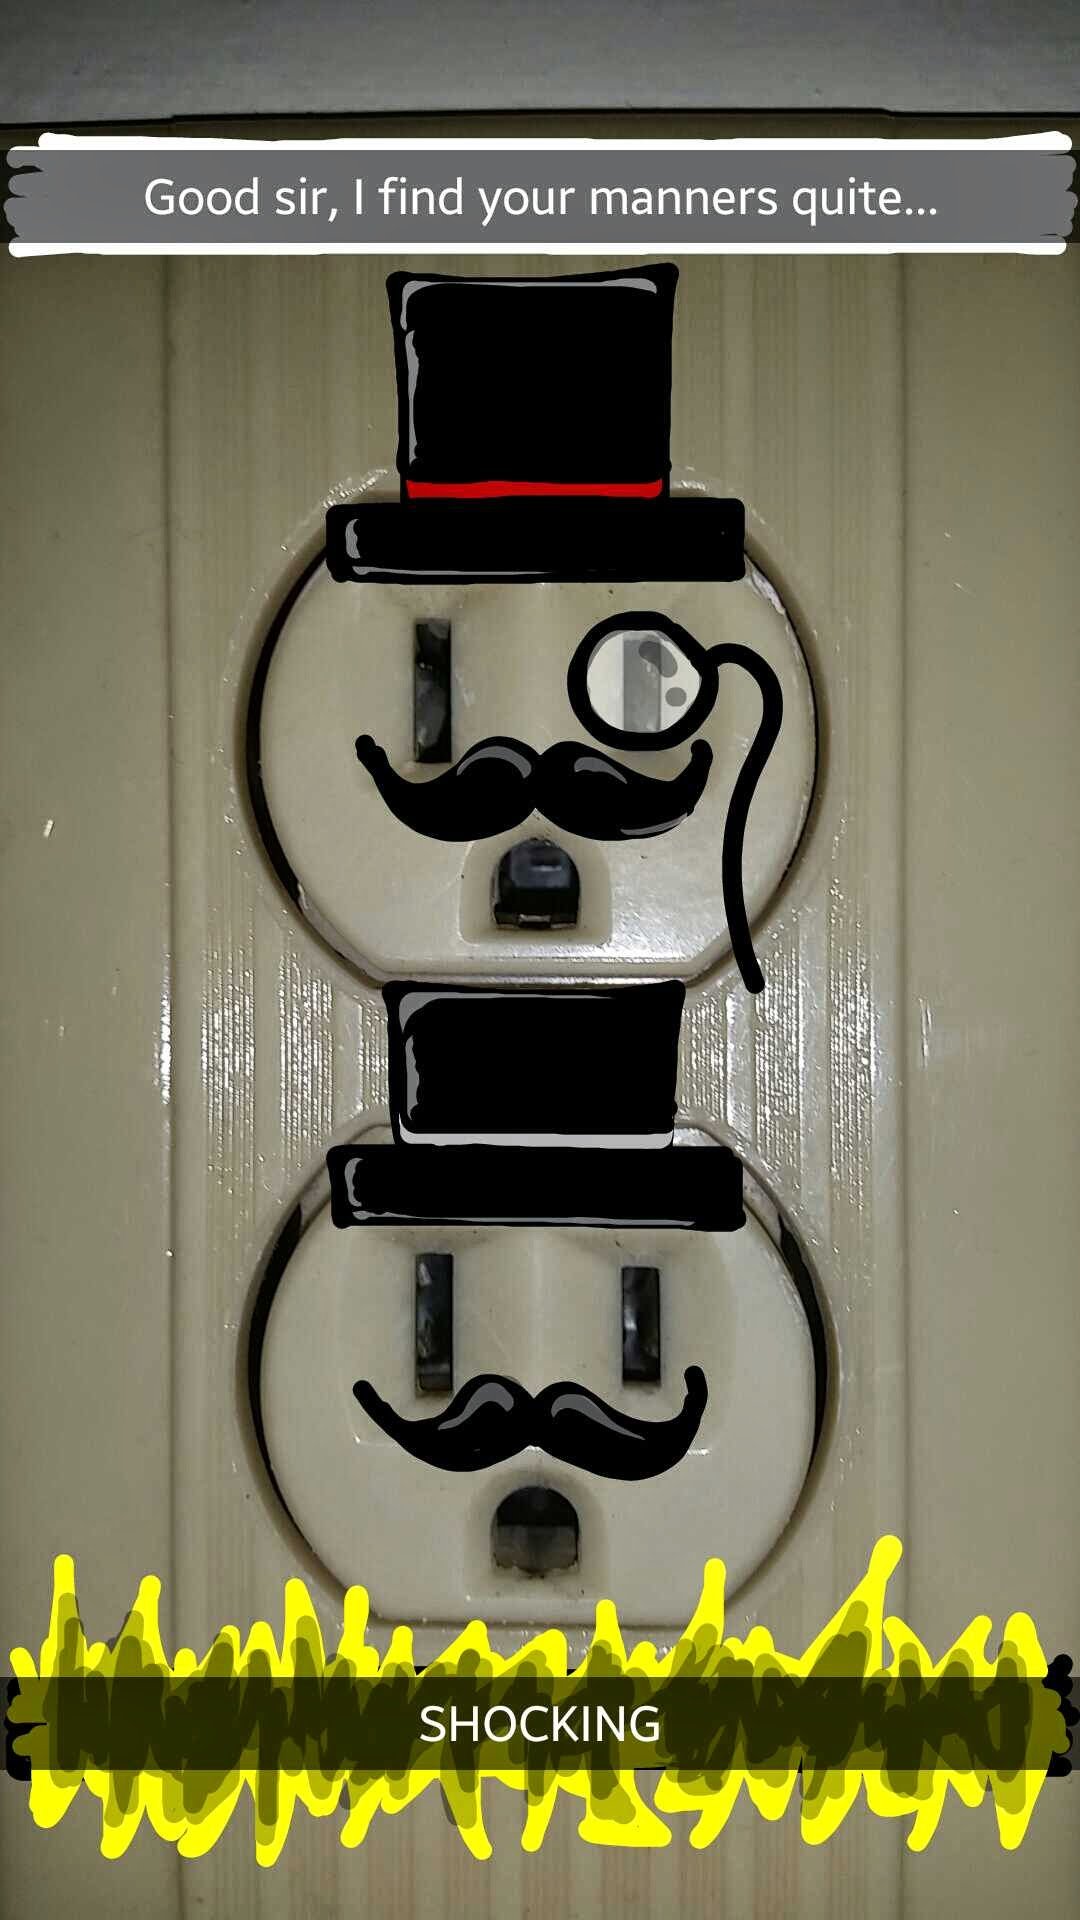 Funny Snapchat drawing of electrical outlets with hats and mustaches with the caption 